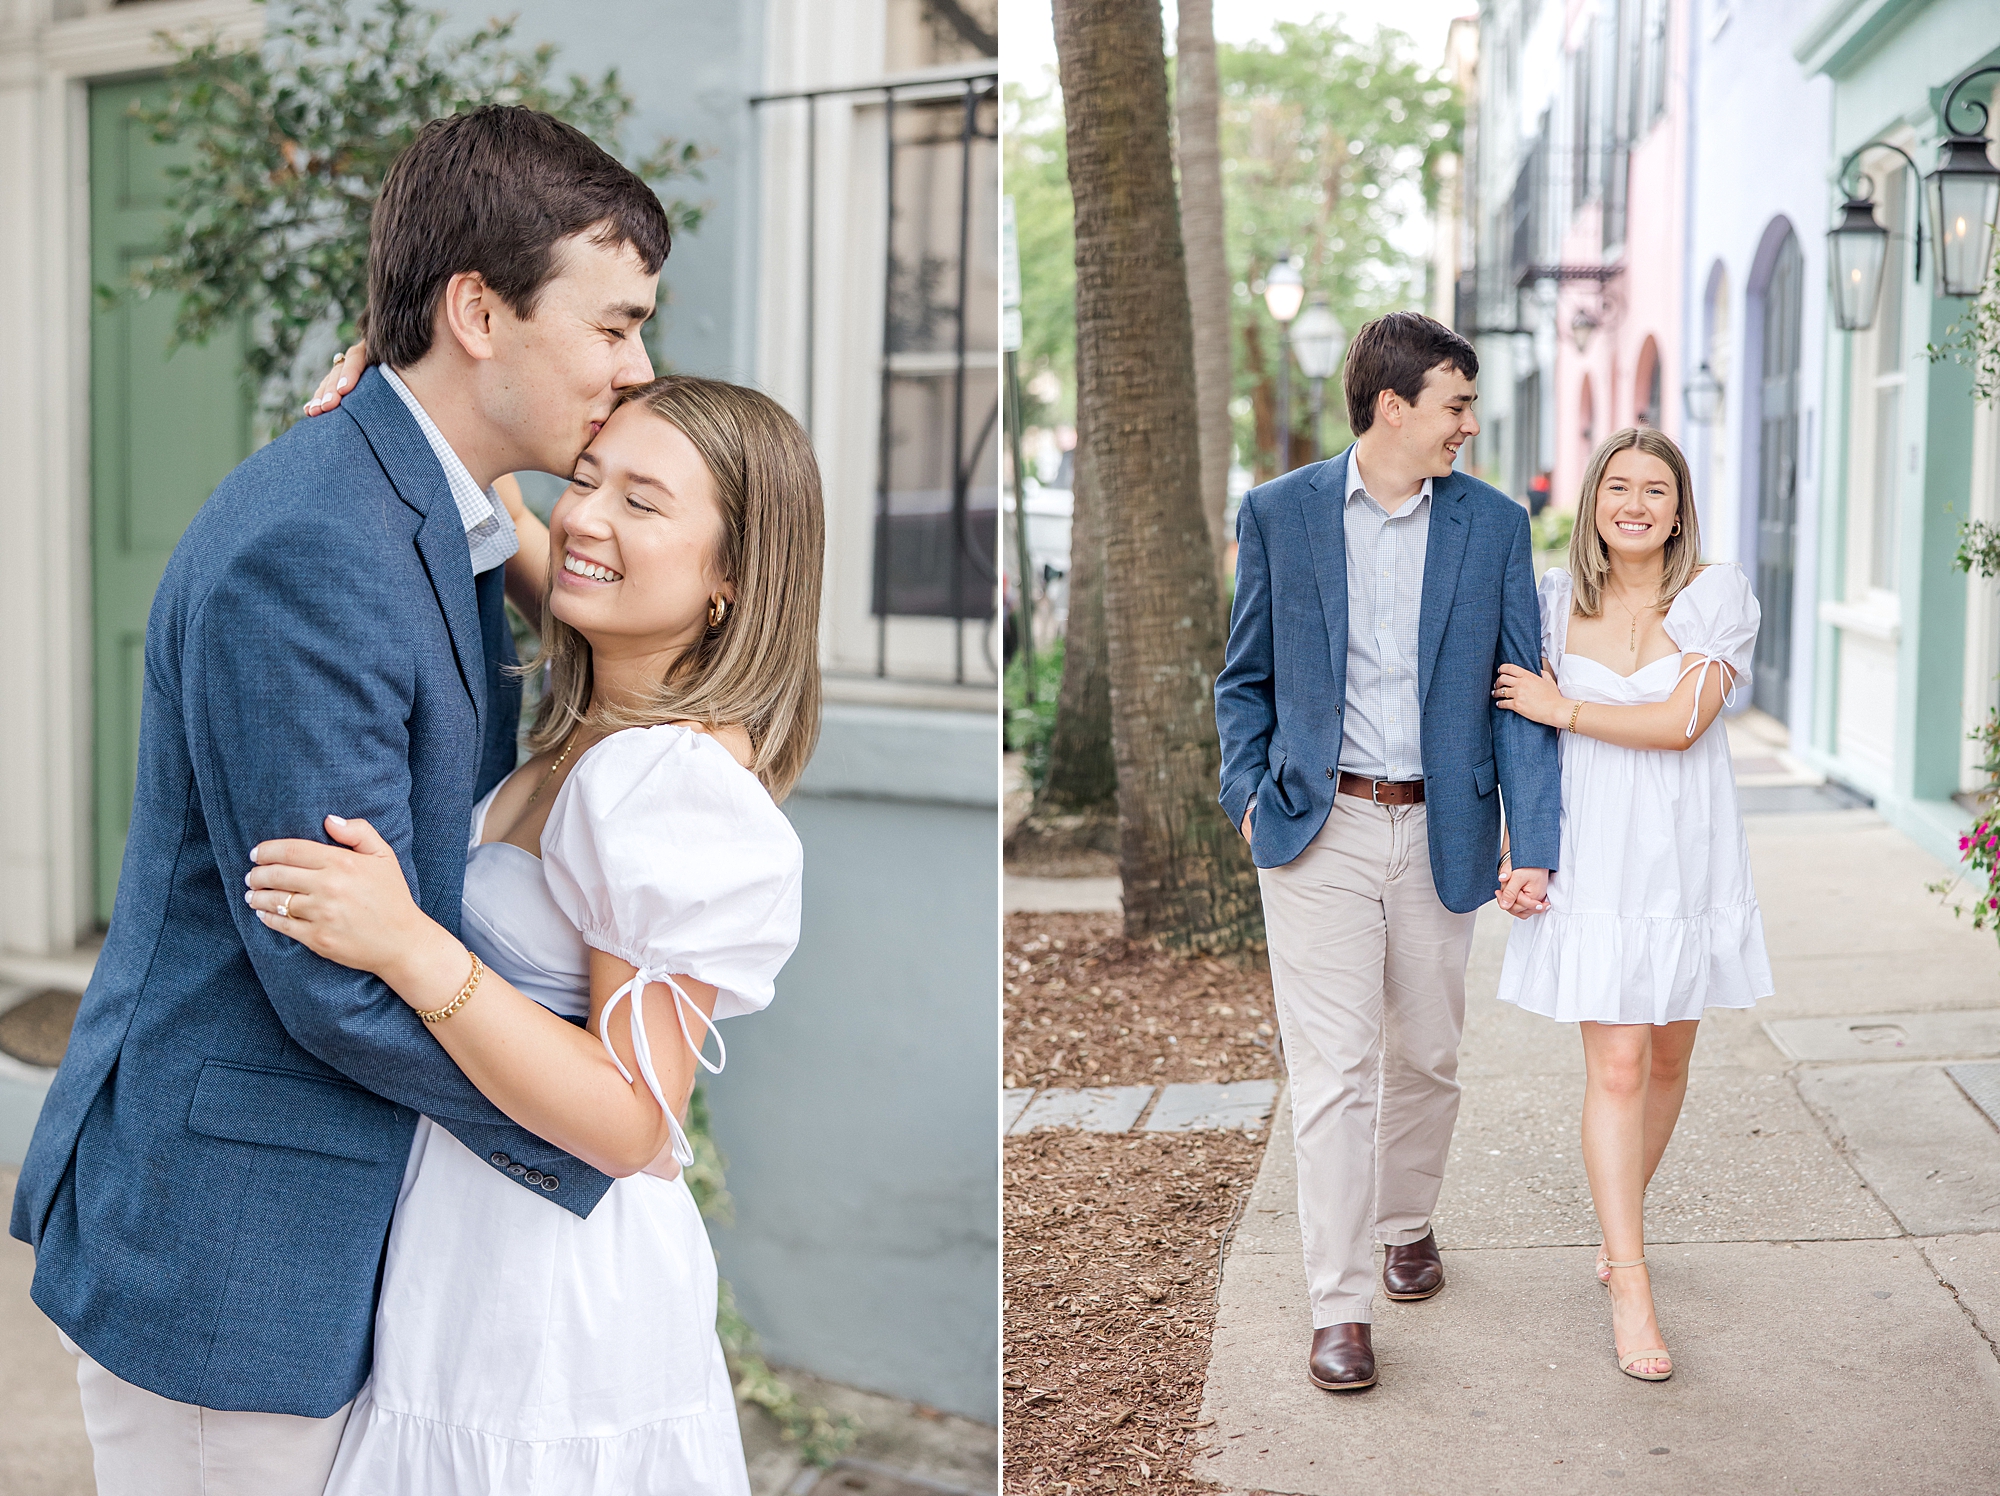 Spring engagement session of couple walking together in historic downtown Charleston